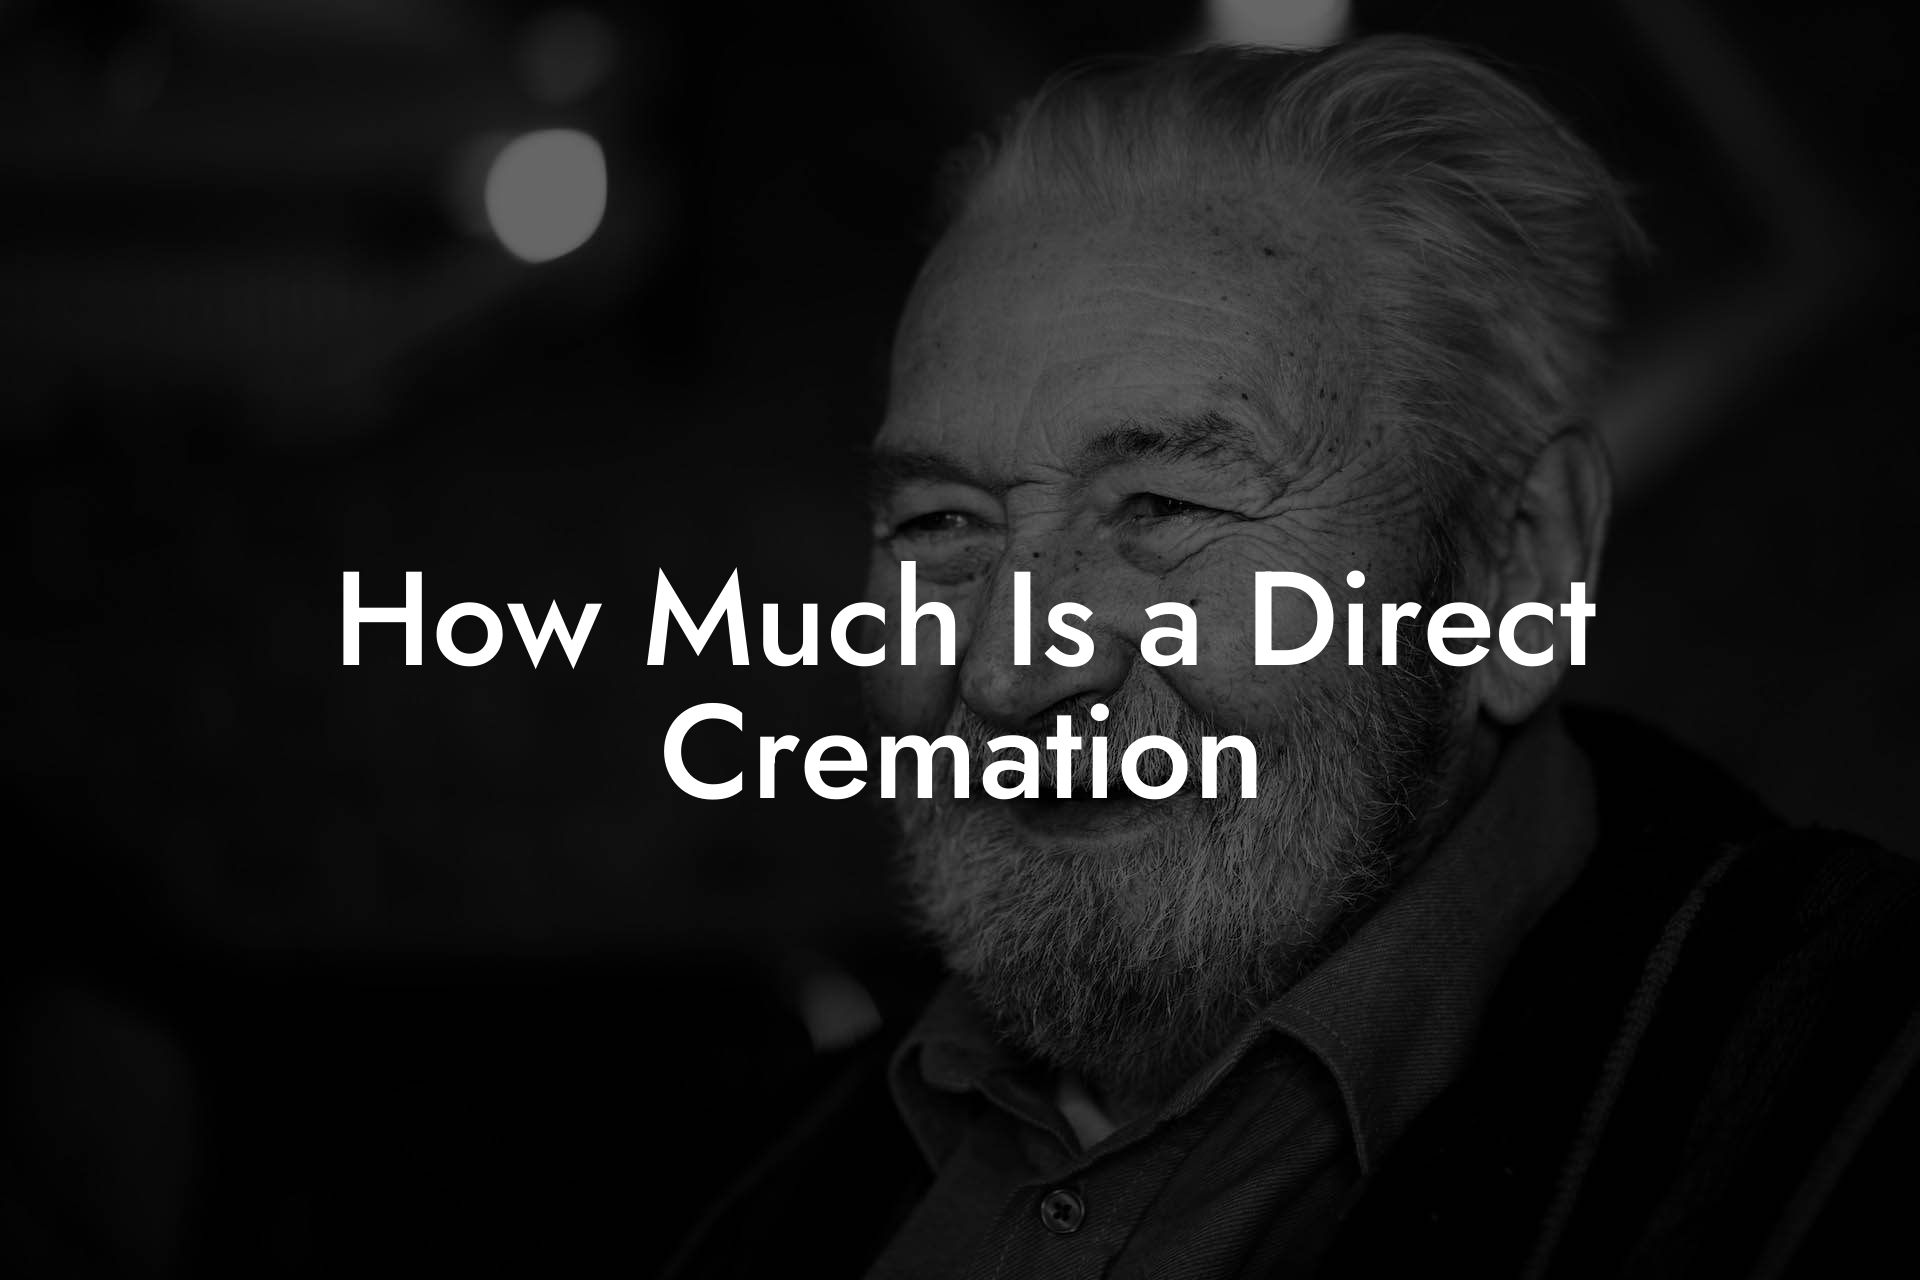 How Much Is a Direct Cremation